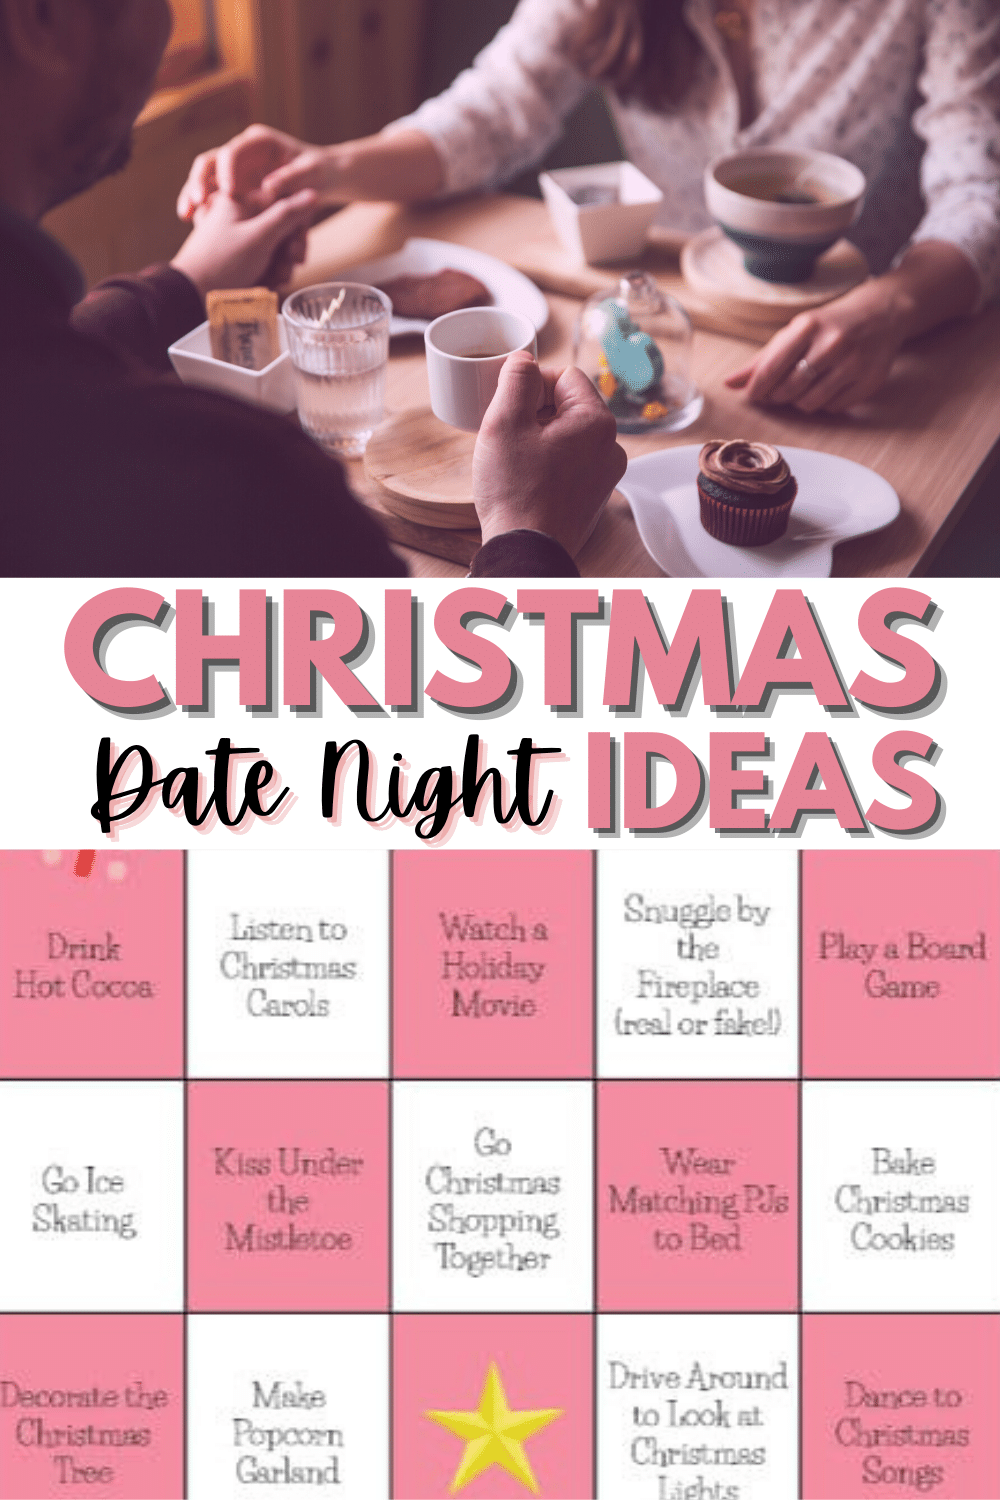 Are you looking for some festive Christmas date ideas for couples? Look no further! We've rounded up a list of unique and romantic activities to help you and your partner celebrate the holiday season together. From